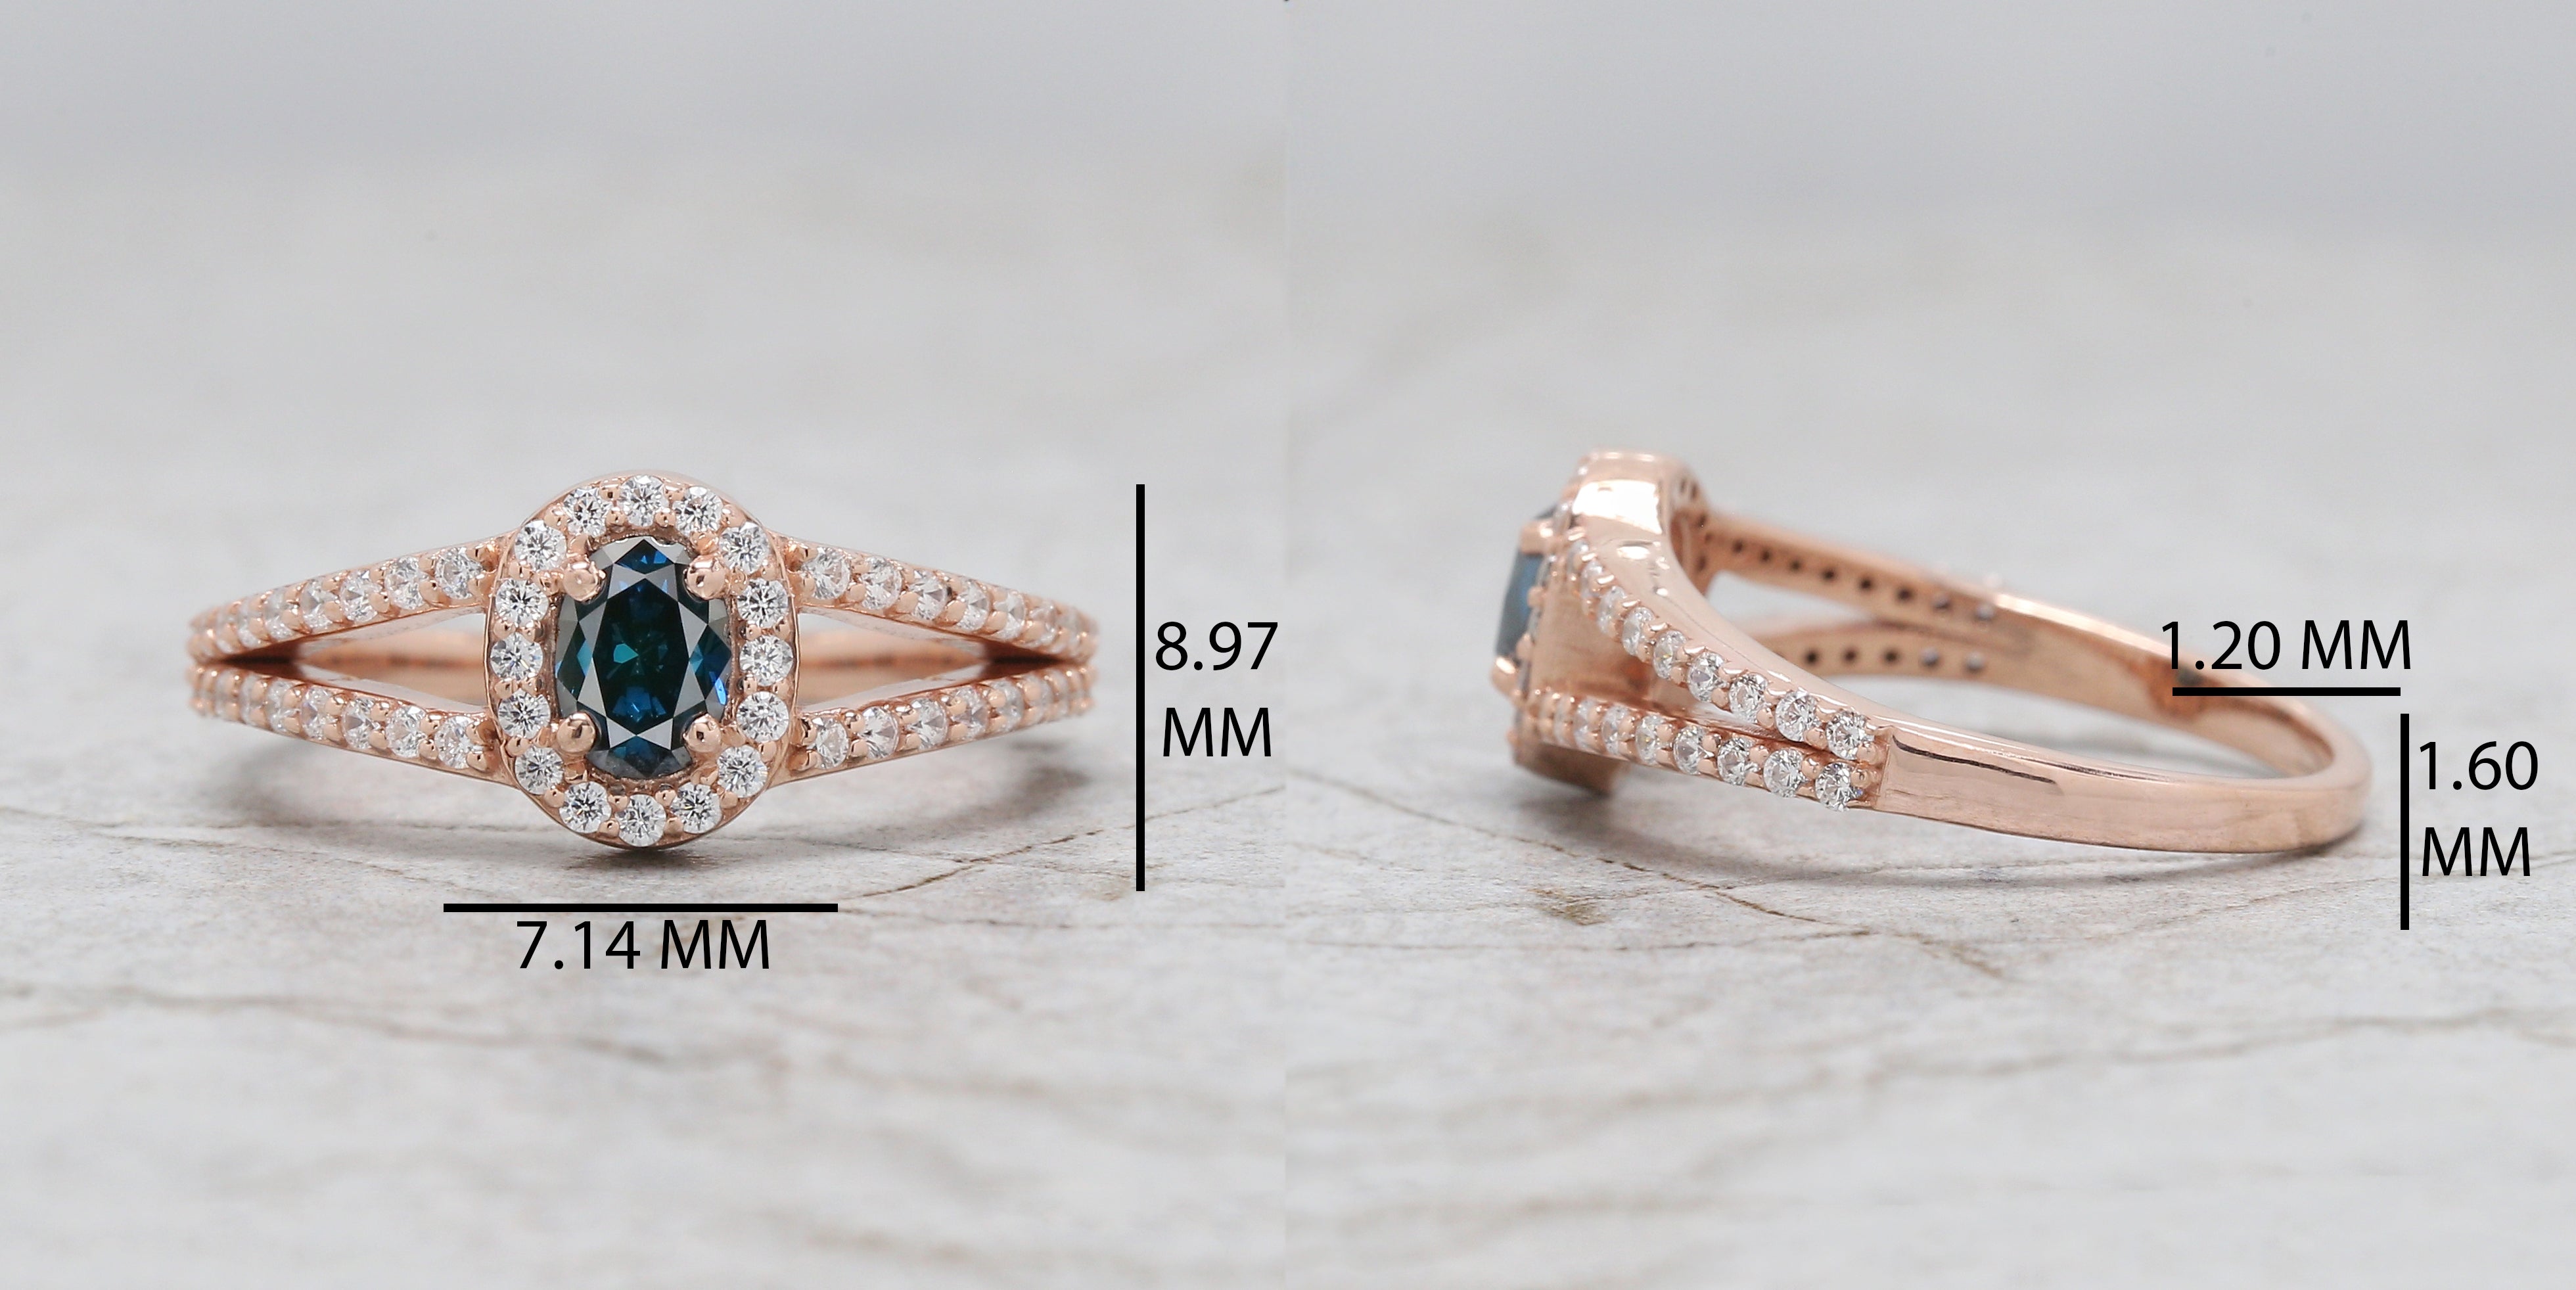 Oval Shape Blue Color Diamond Ring 0.51 Ct 5.55 MM Oval Cut Diamond Ring 14K Solid Rose Gold Silver Engagement Oval Ring Gift For Her QL664